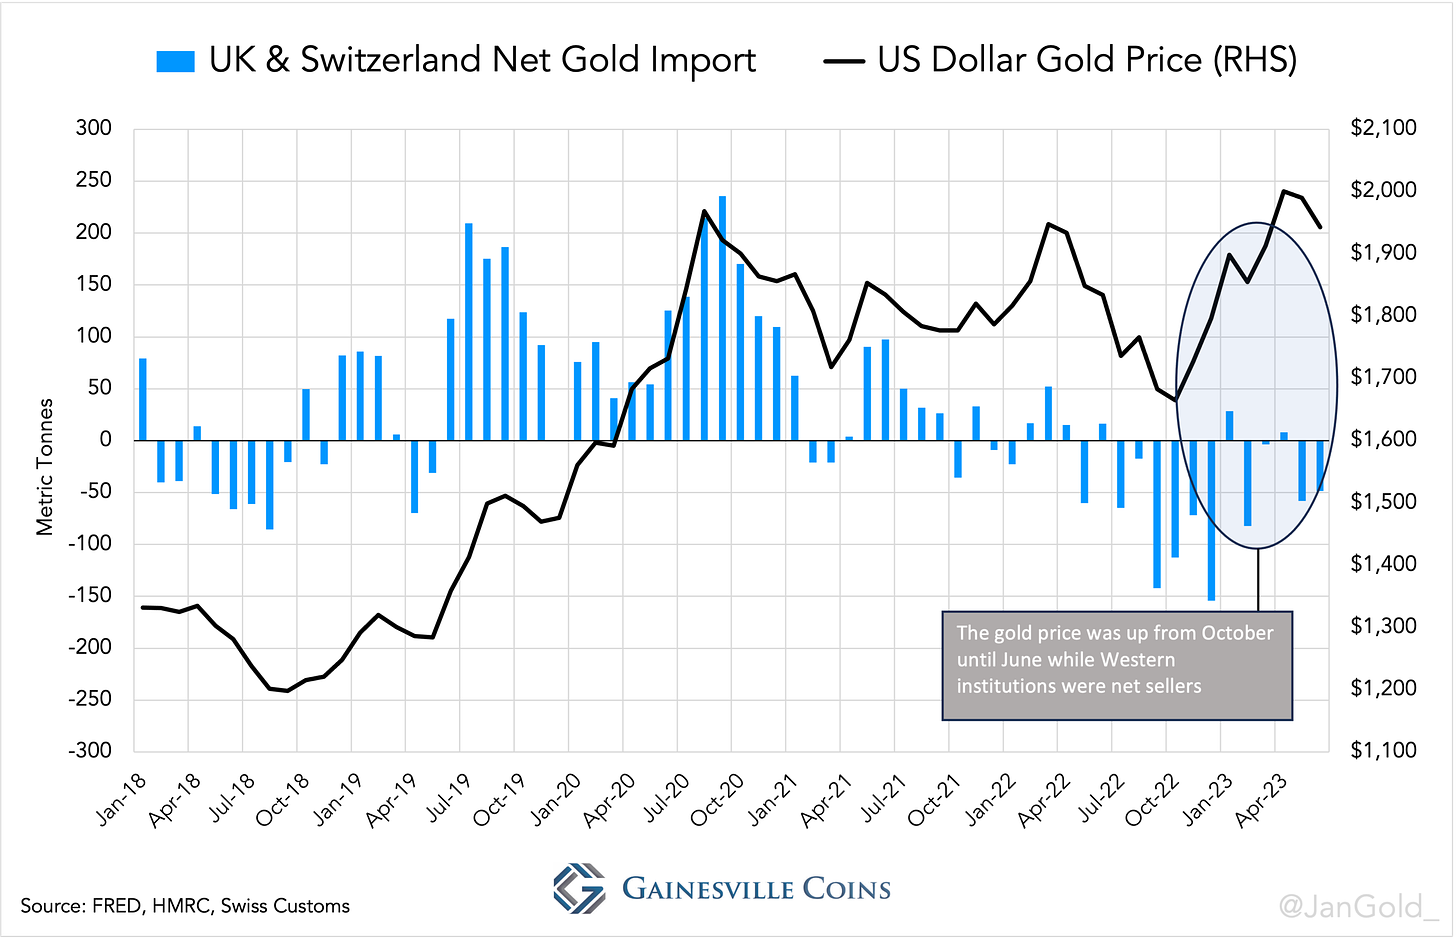 chart showing UK and Swiss net gold imports since 2018